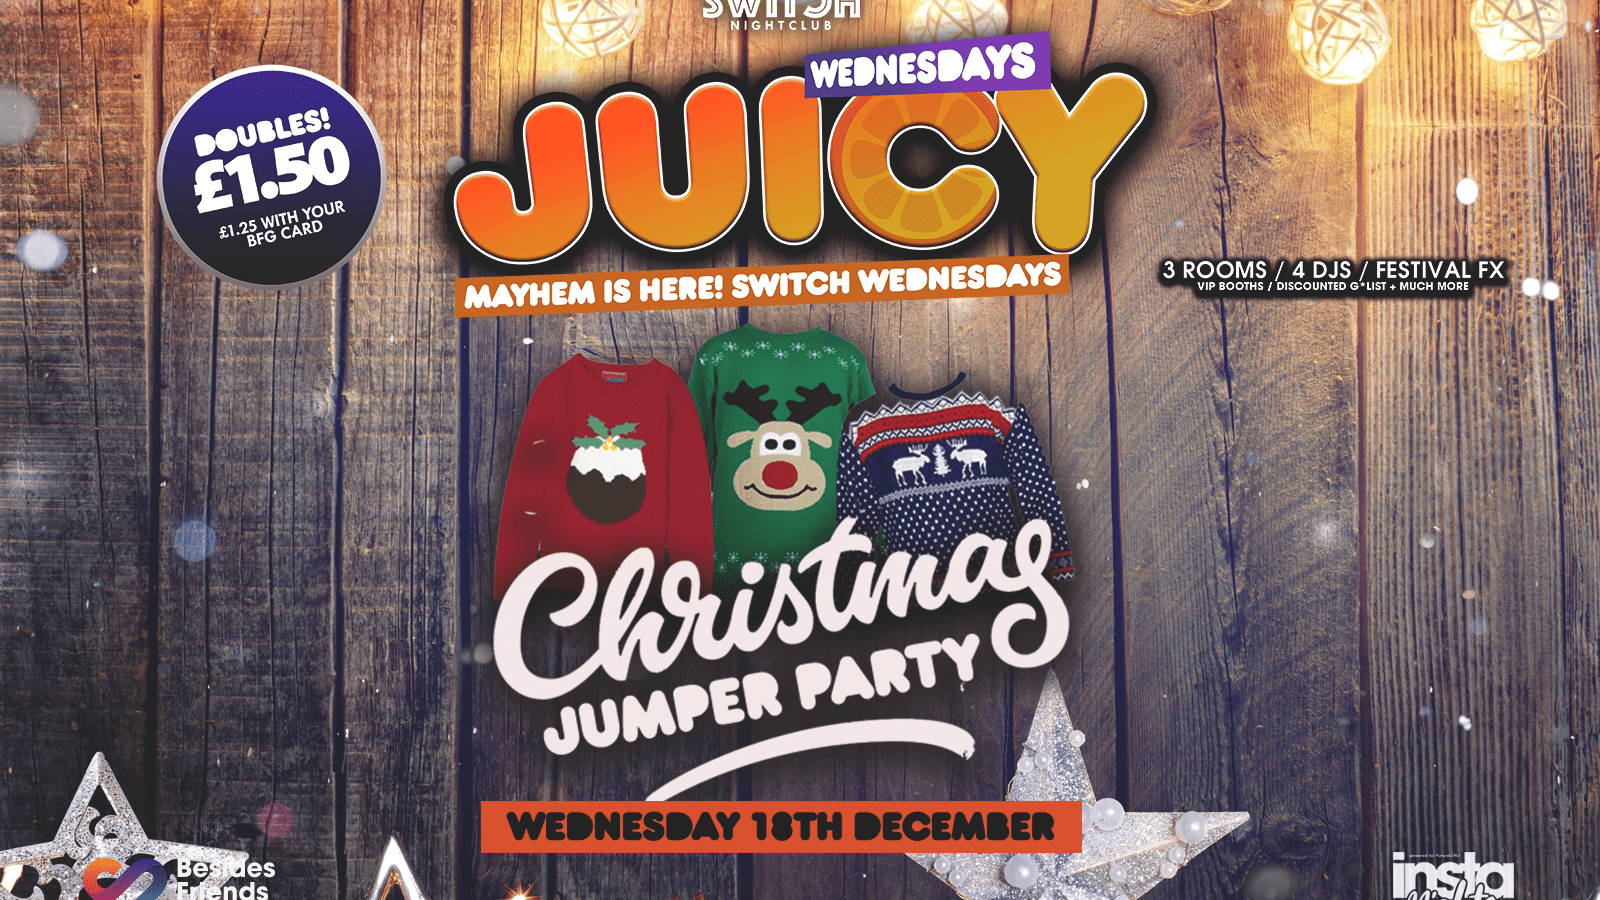 Juicy Wednesdays Presents Christmas Jumper Party